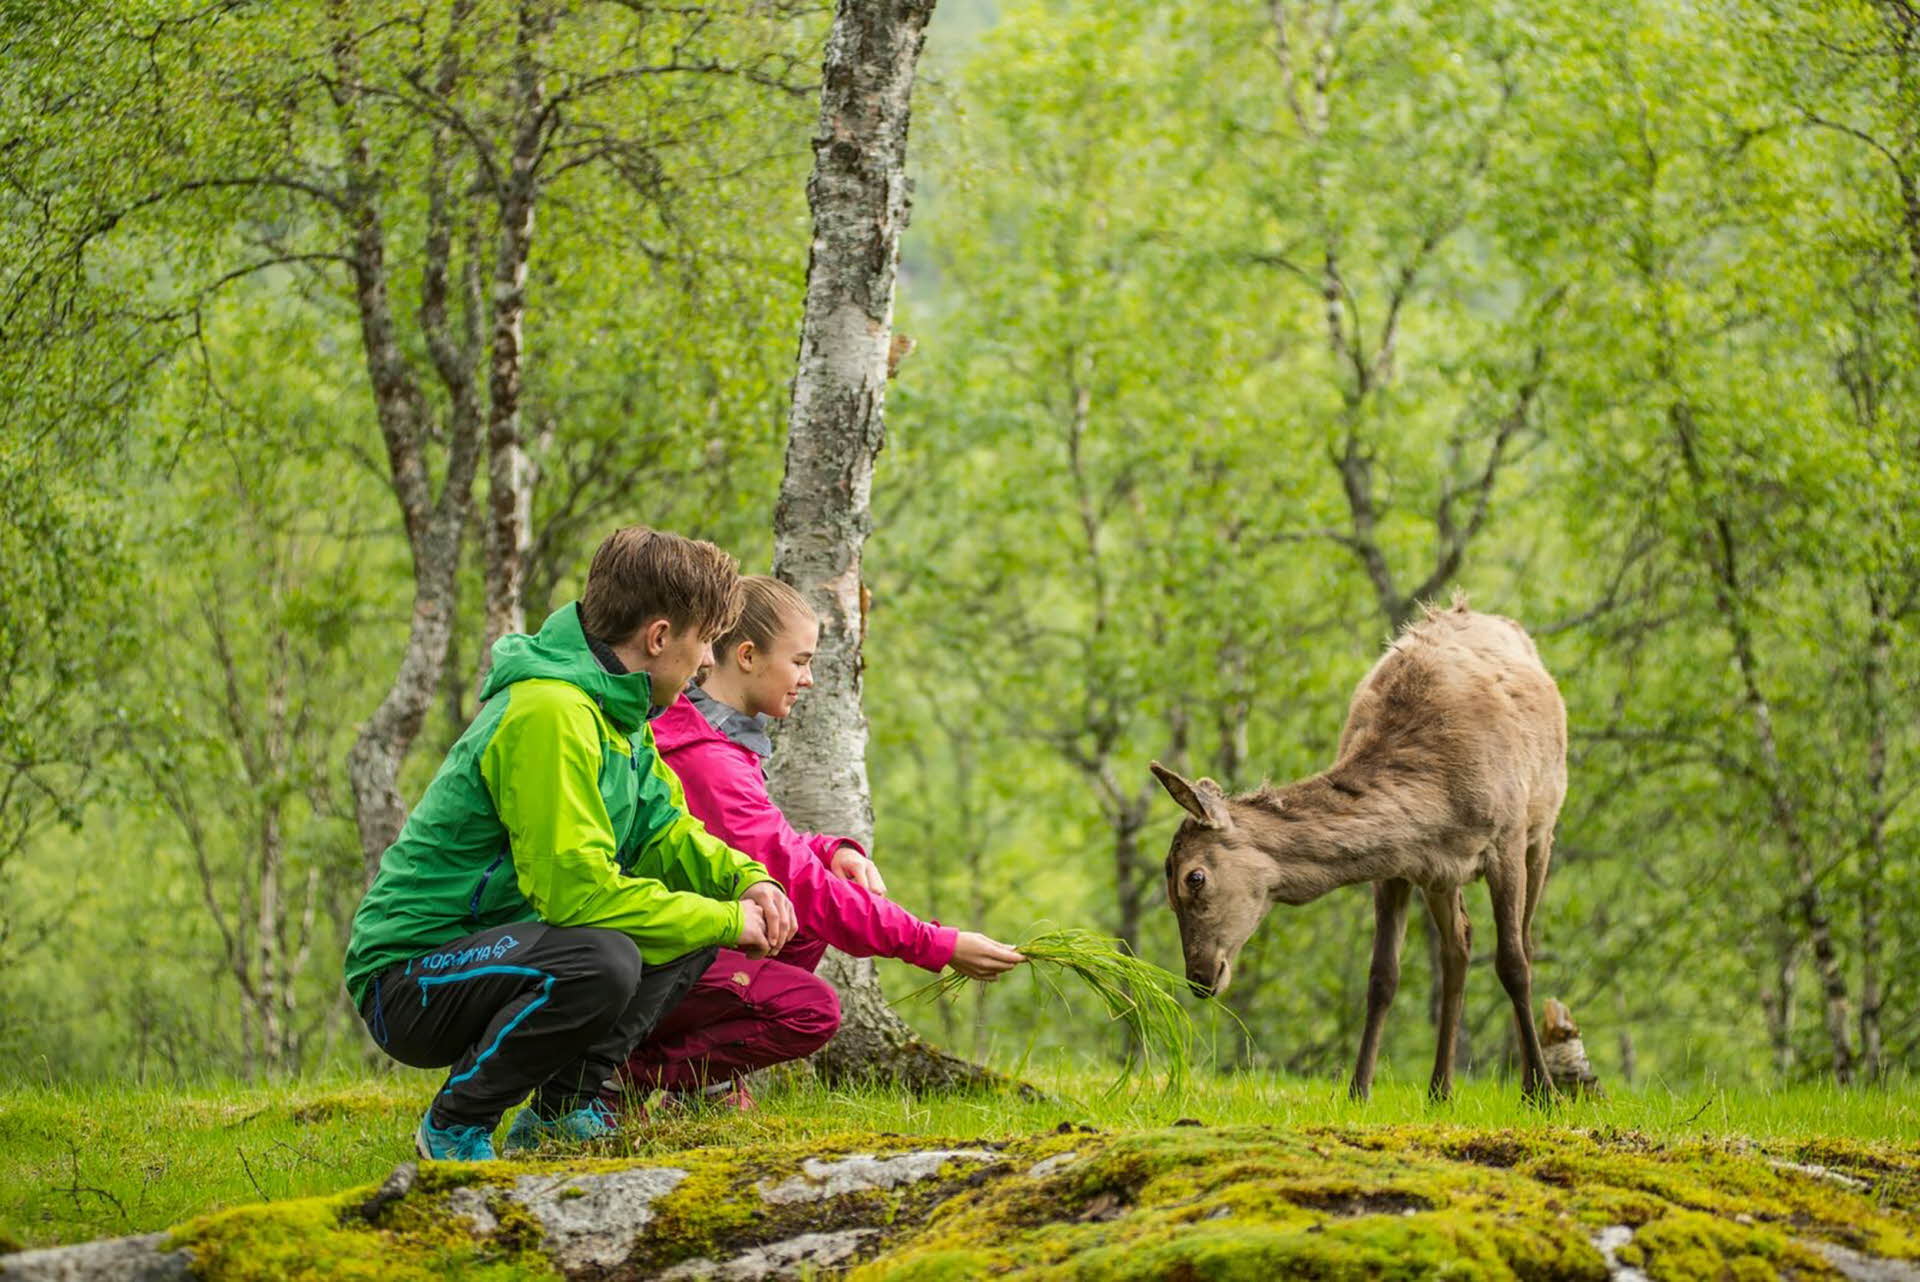 A boy and a girl in green and pink jackets sit by a deer in a green forest.